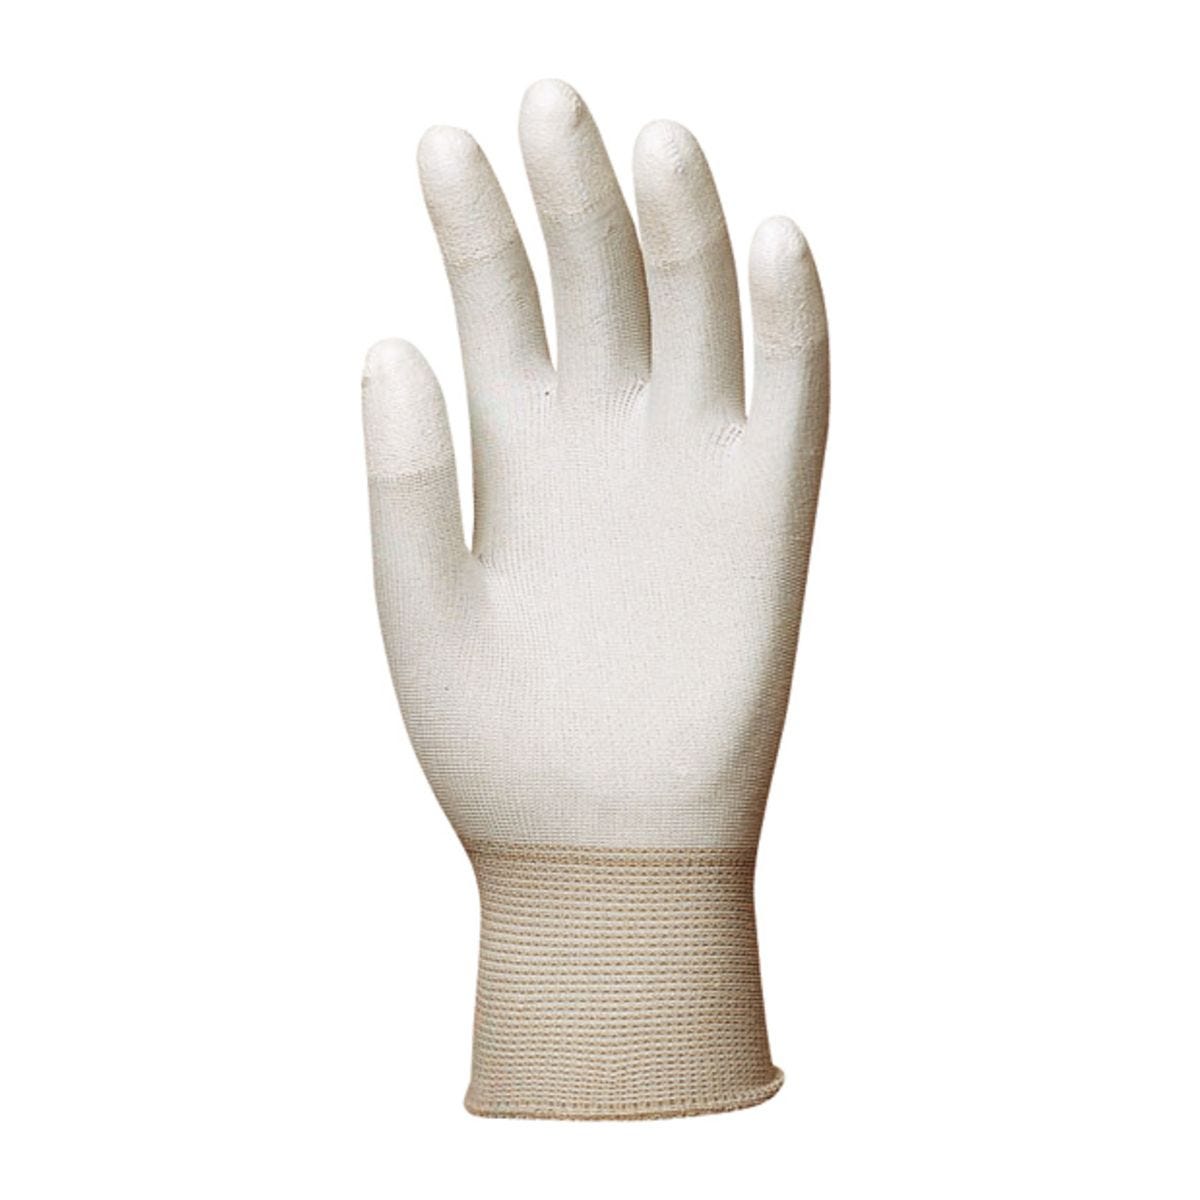 Gants polyester blanc, doigts enduits PU blanc - Coverguard - Taille S-7 0